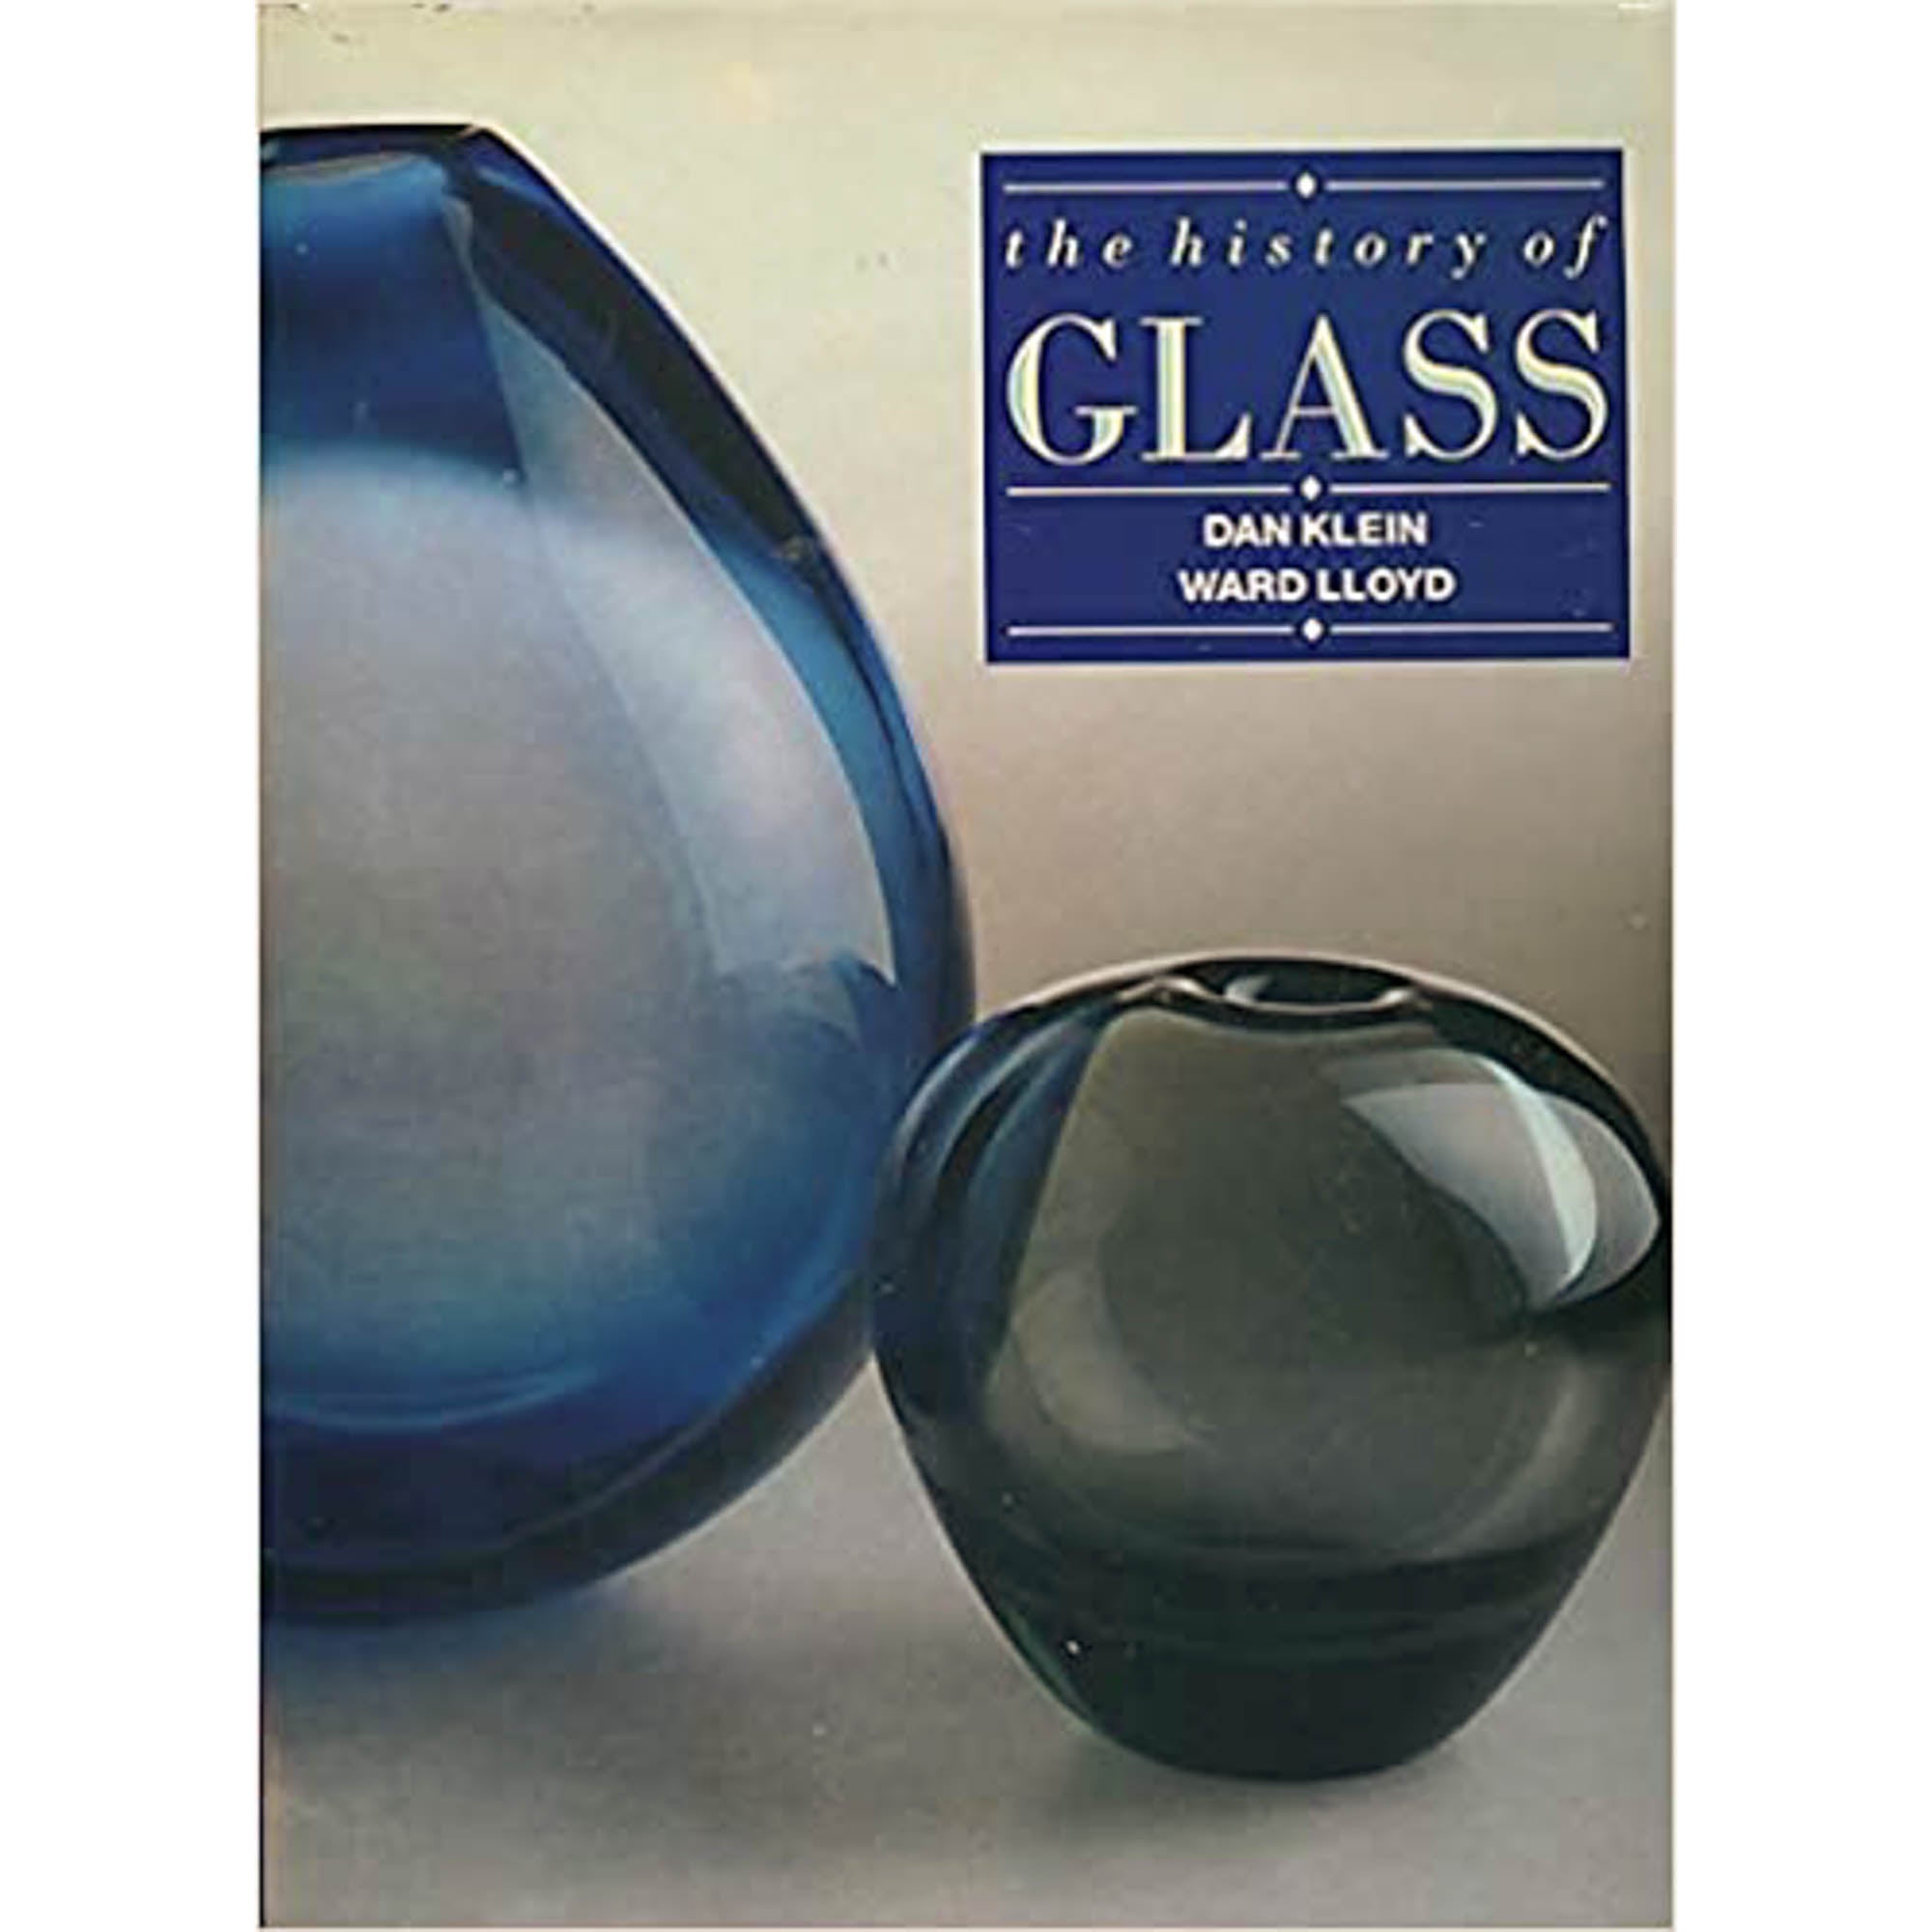 The History of Glass